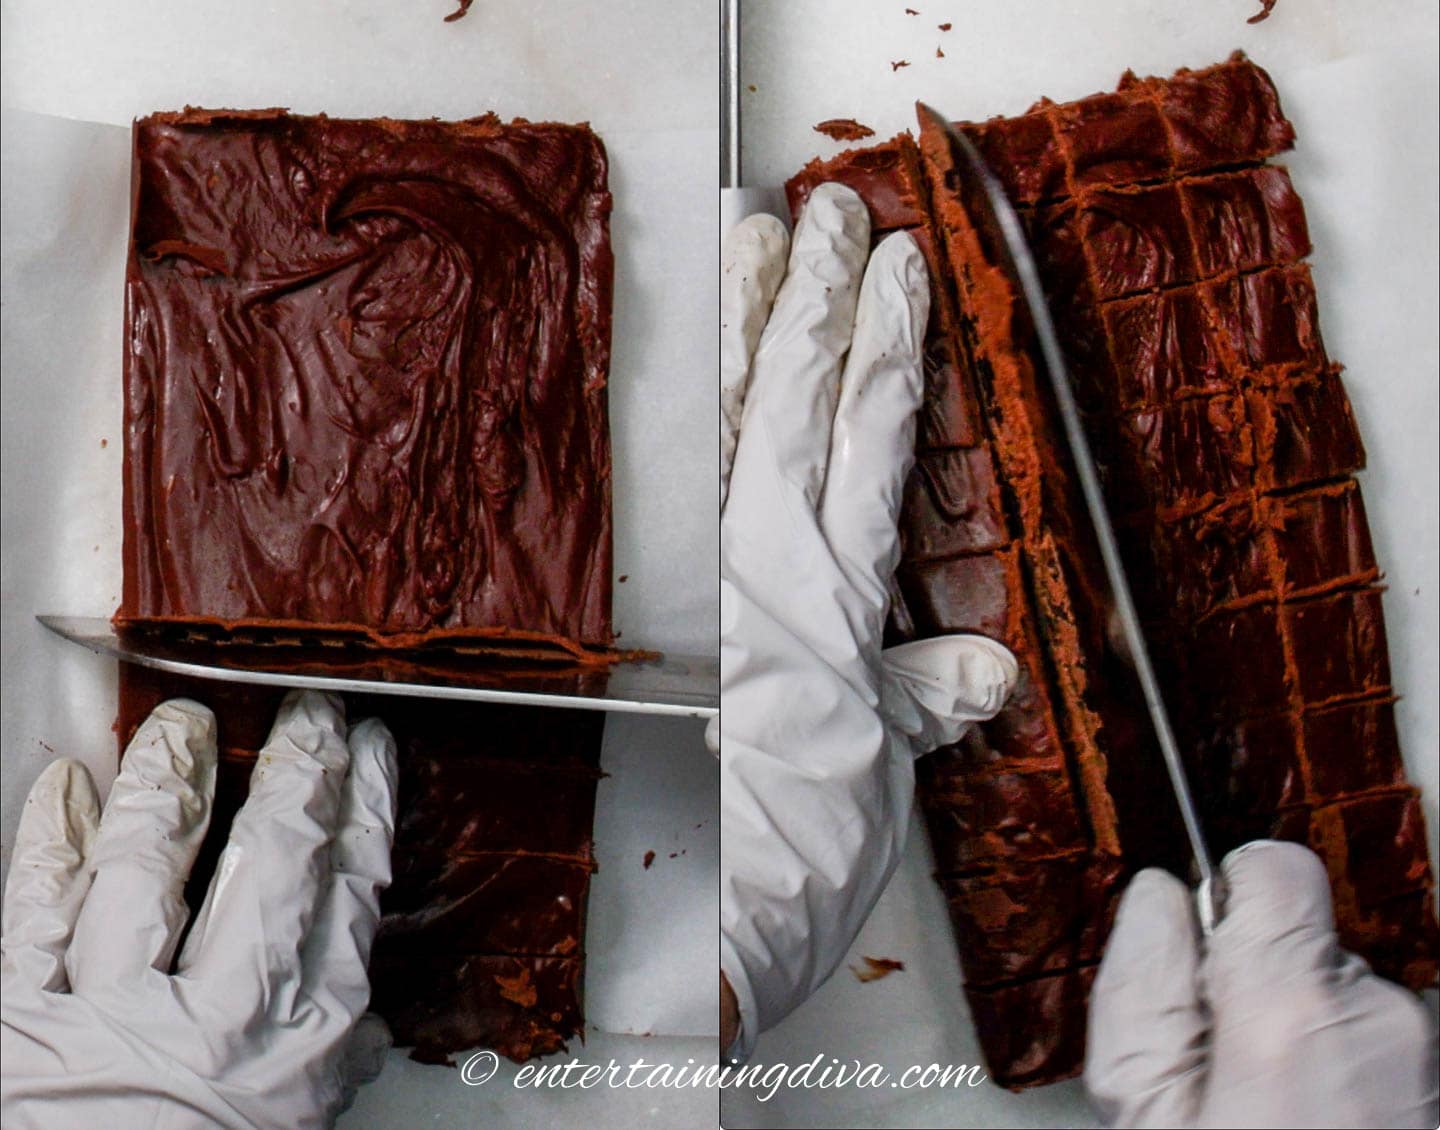 fudge being cut into 1 inch squares